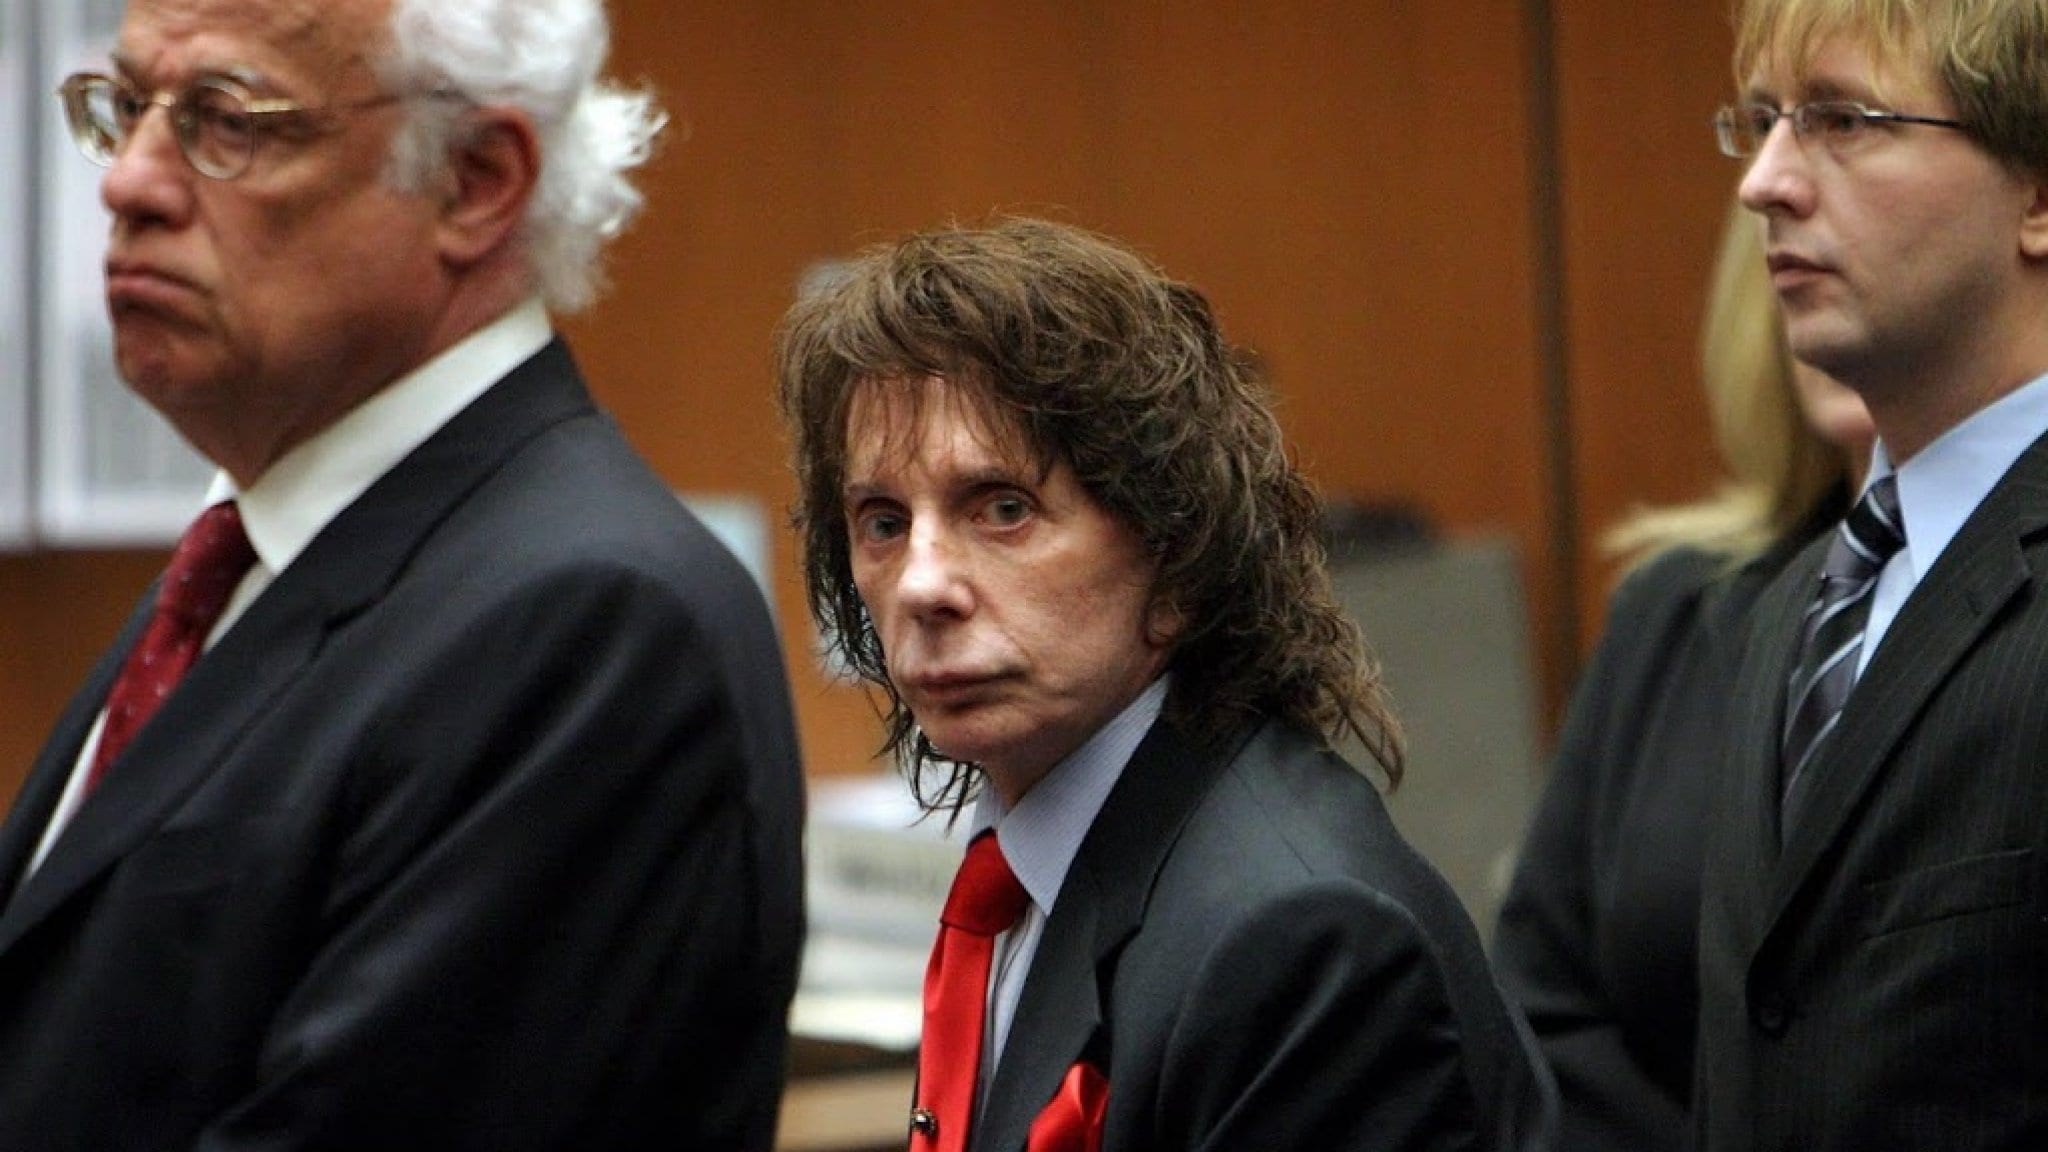 Phil Spector: Pop producer jailed for murder dies at 81